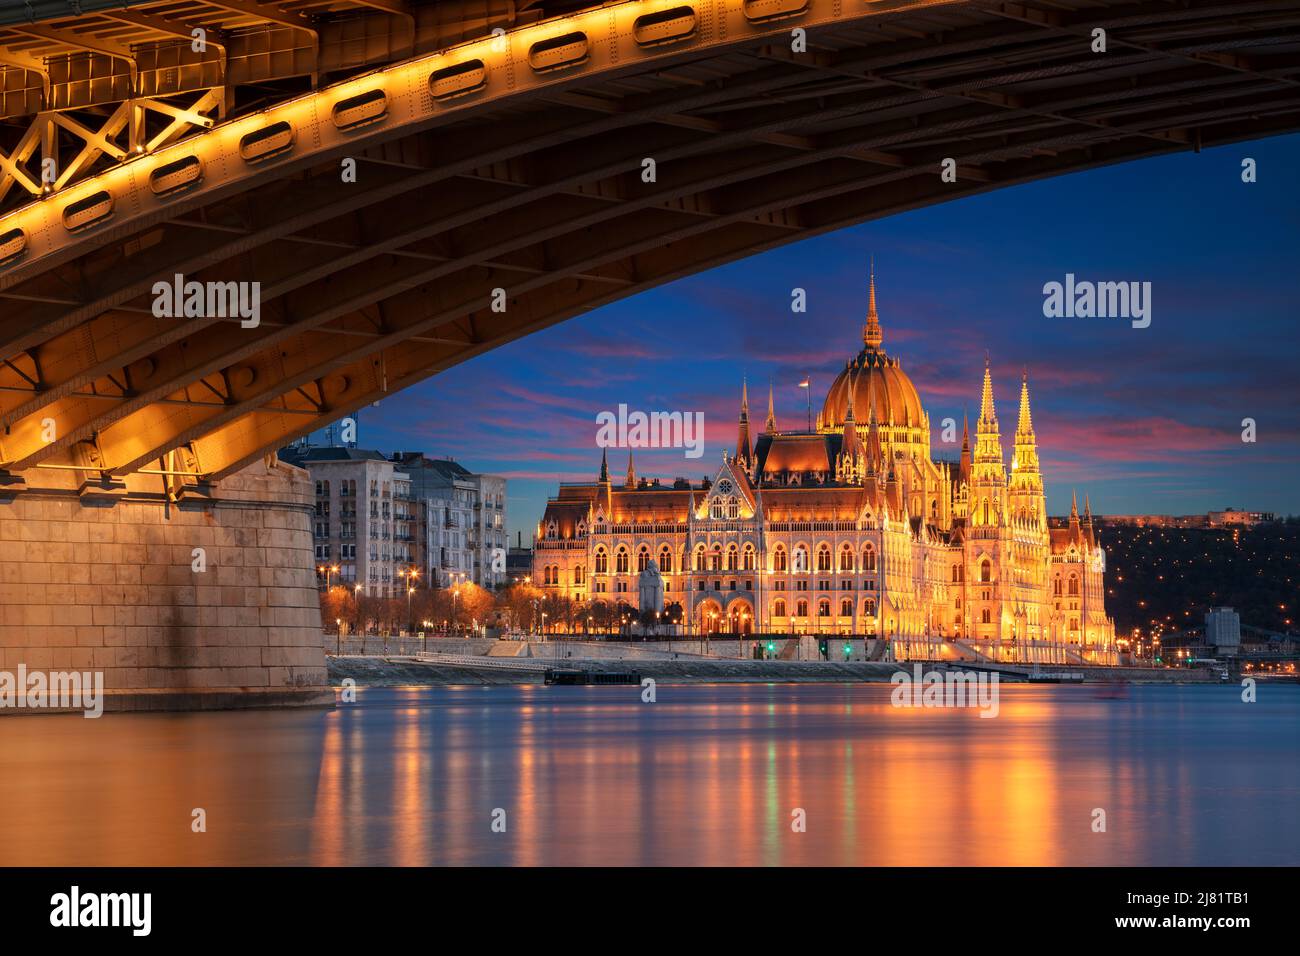 Budapest, Hungary. Cityscape image of Budapest, capital city of Hungary with Margaret Bridge and Hungarian Parliament Building at sunset. Stock Photo